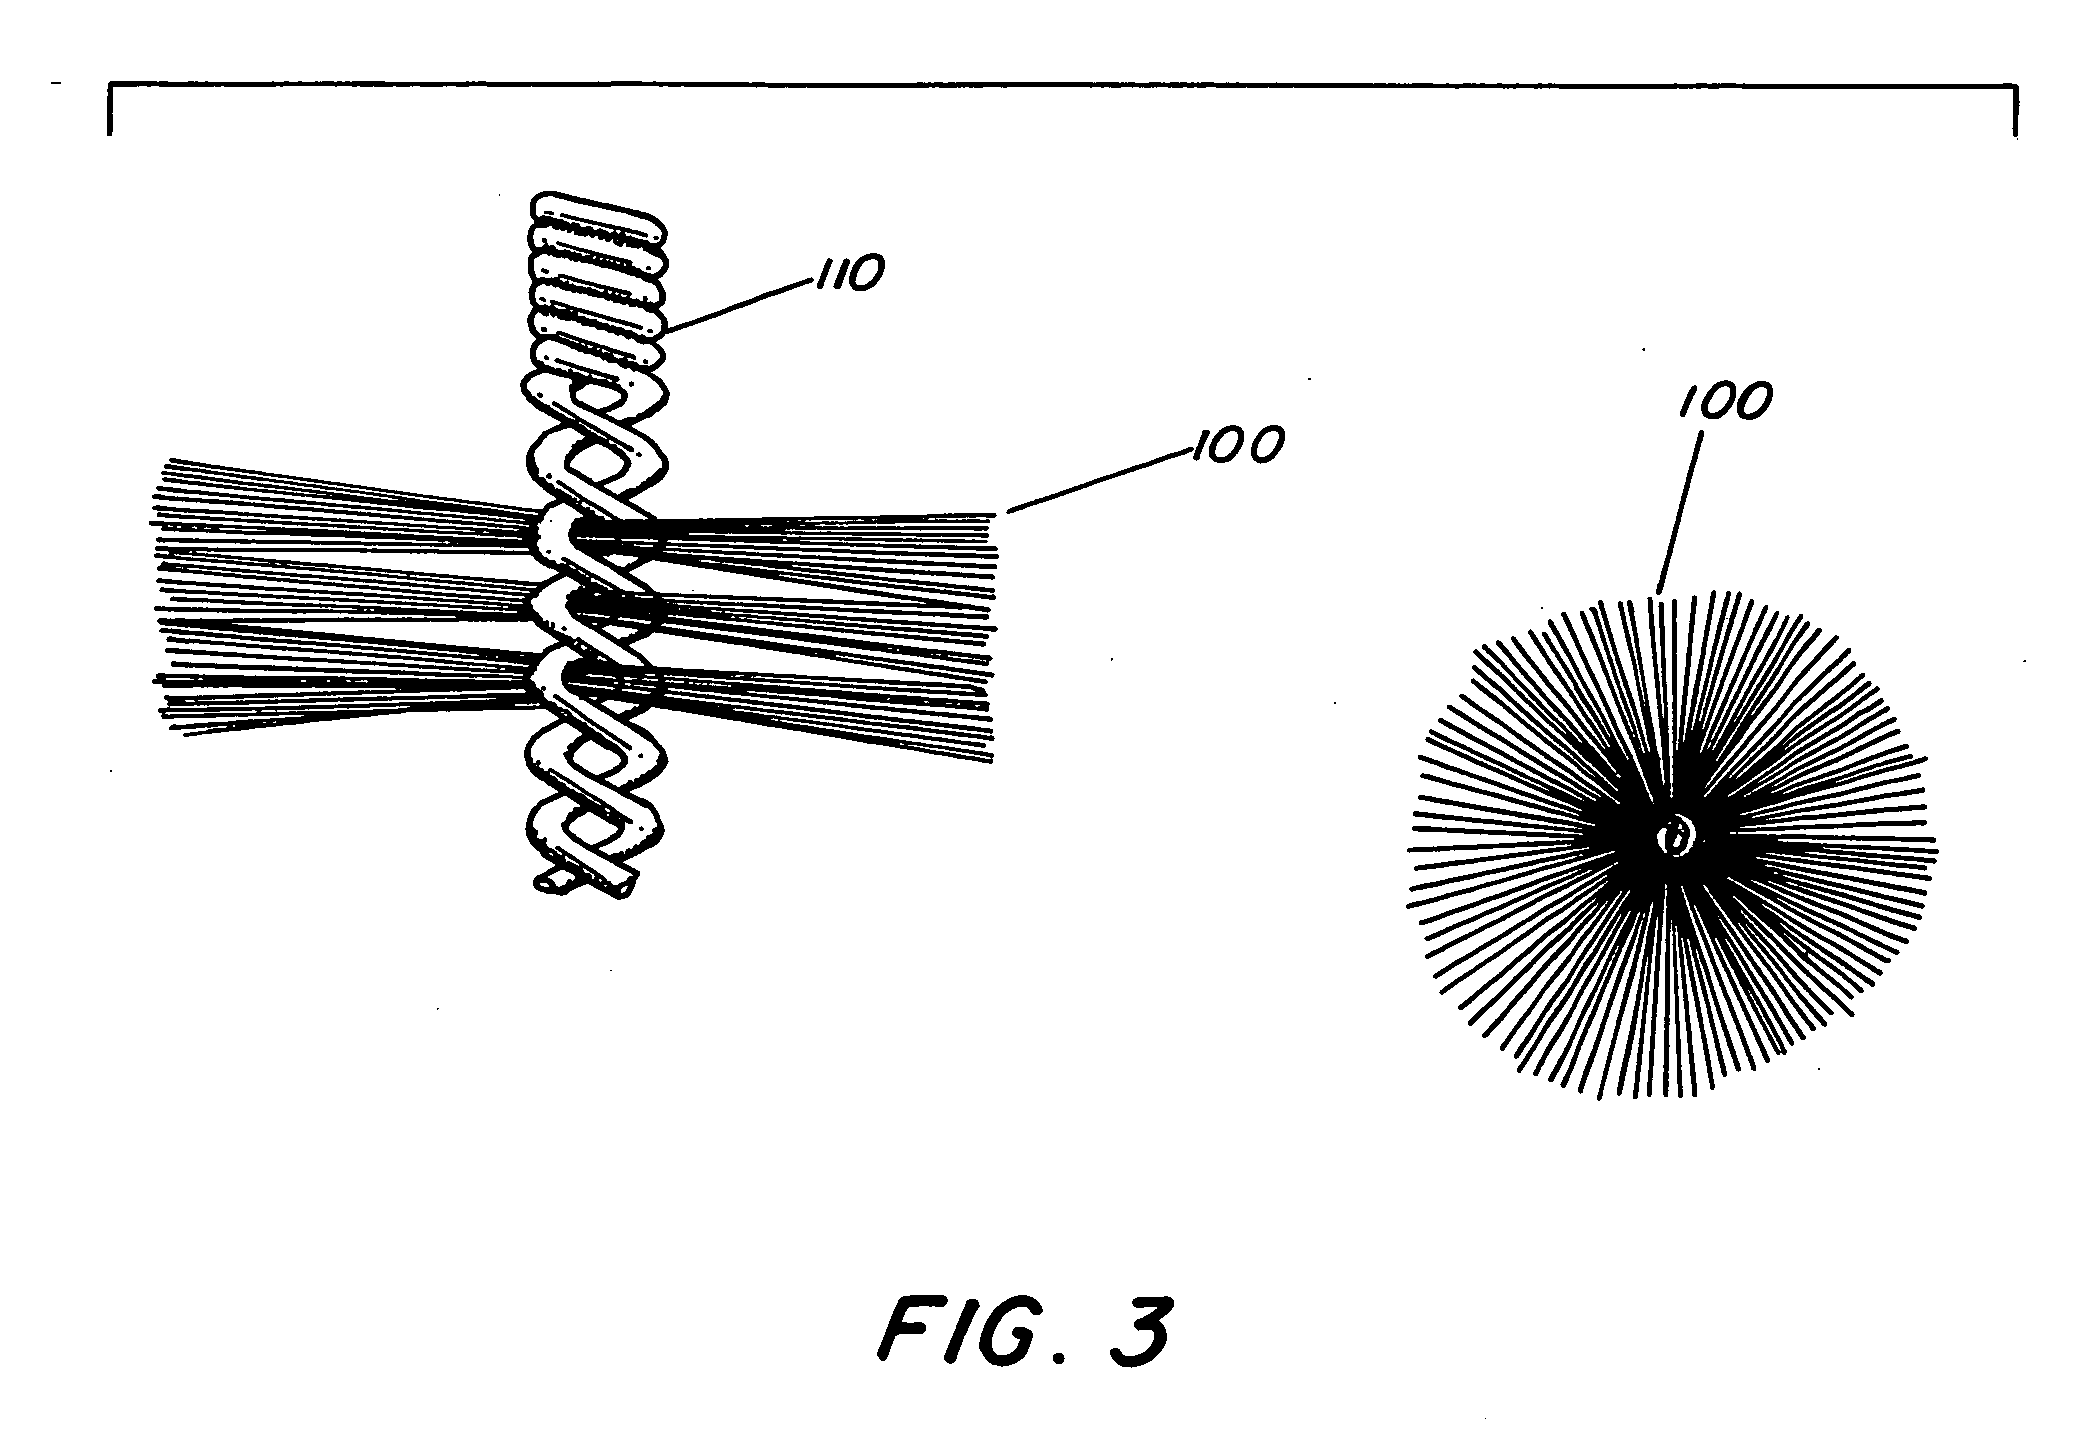 Method and apparatus for generating power from voltage gradients at sediment-water interfaces using active transport of sediment porewater